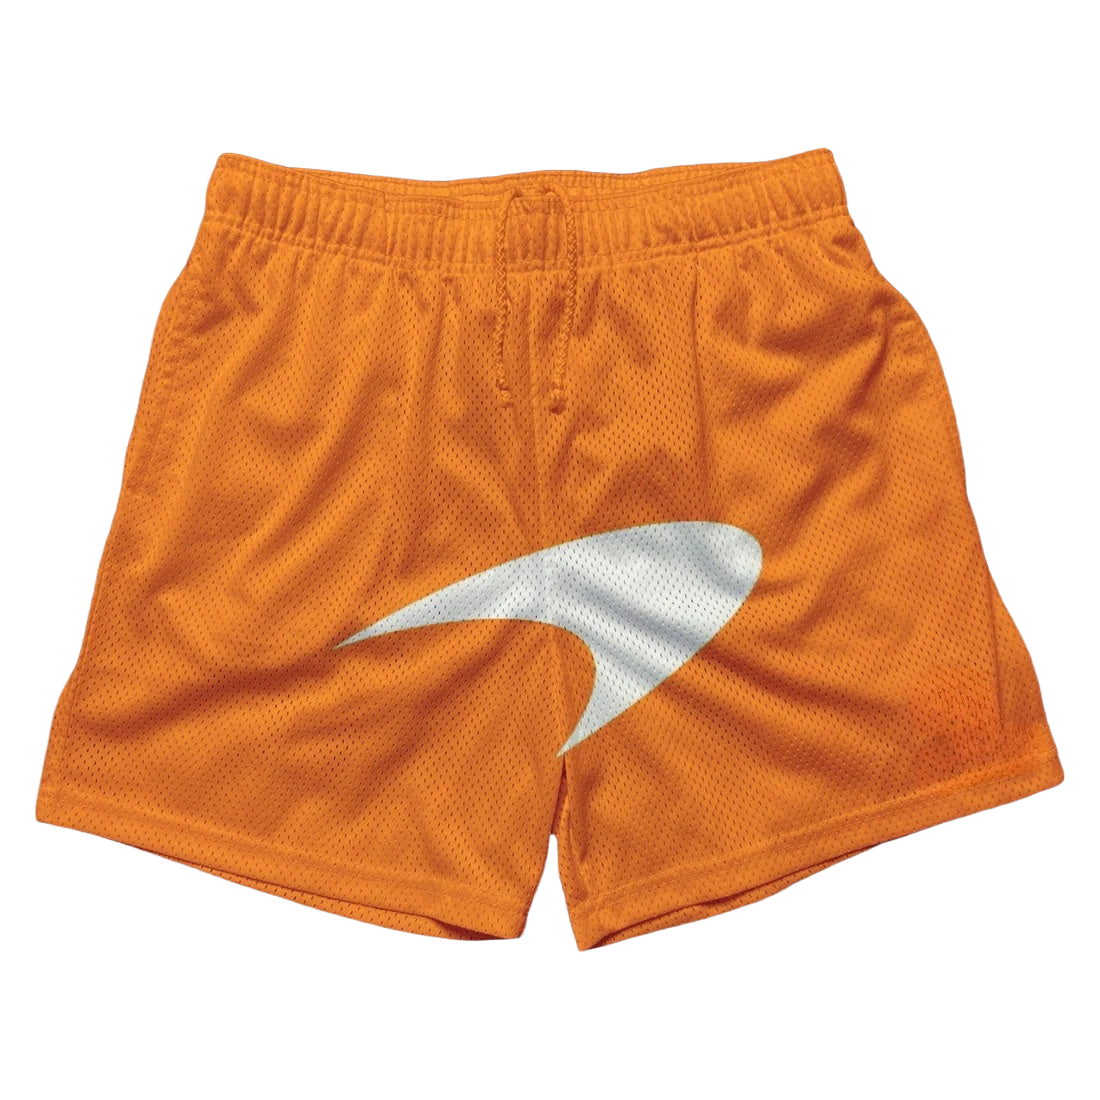 an orange shorts with a white logo on it